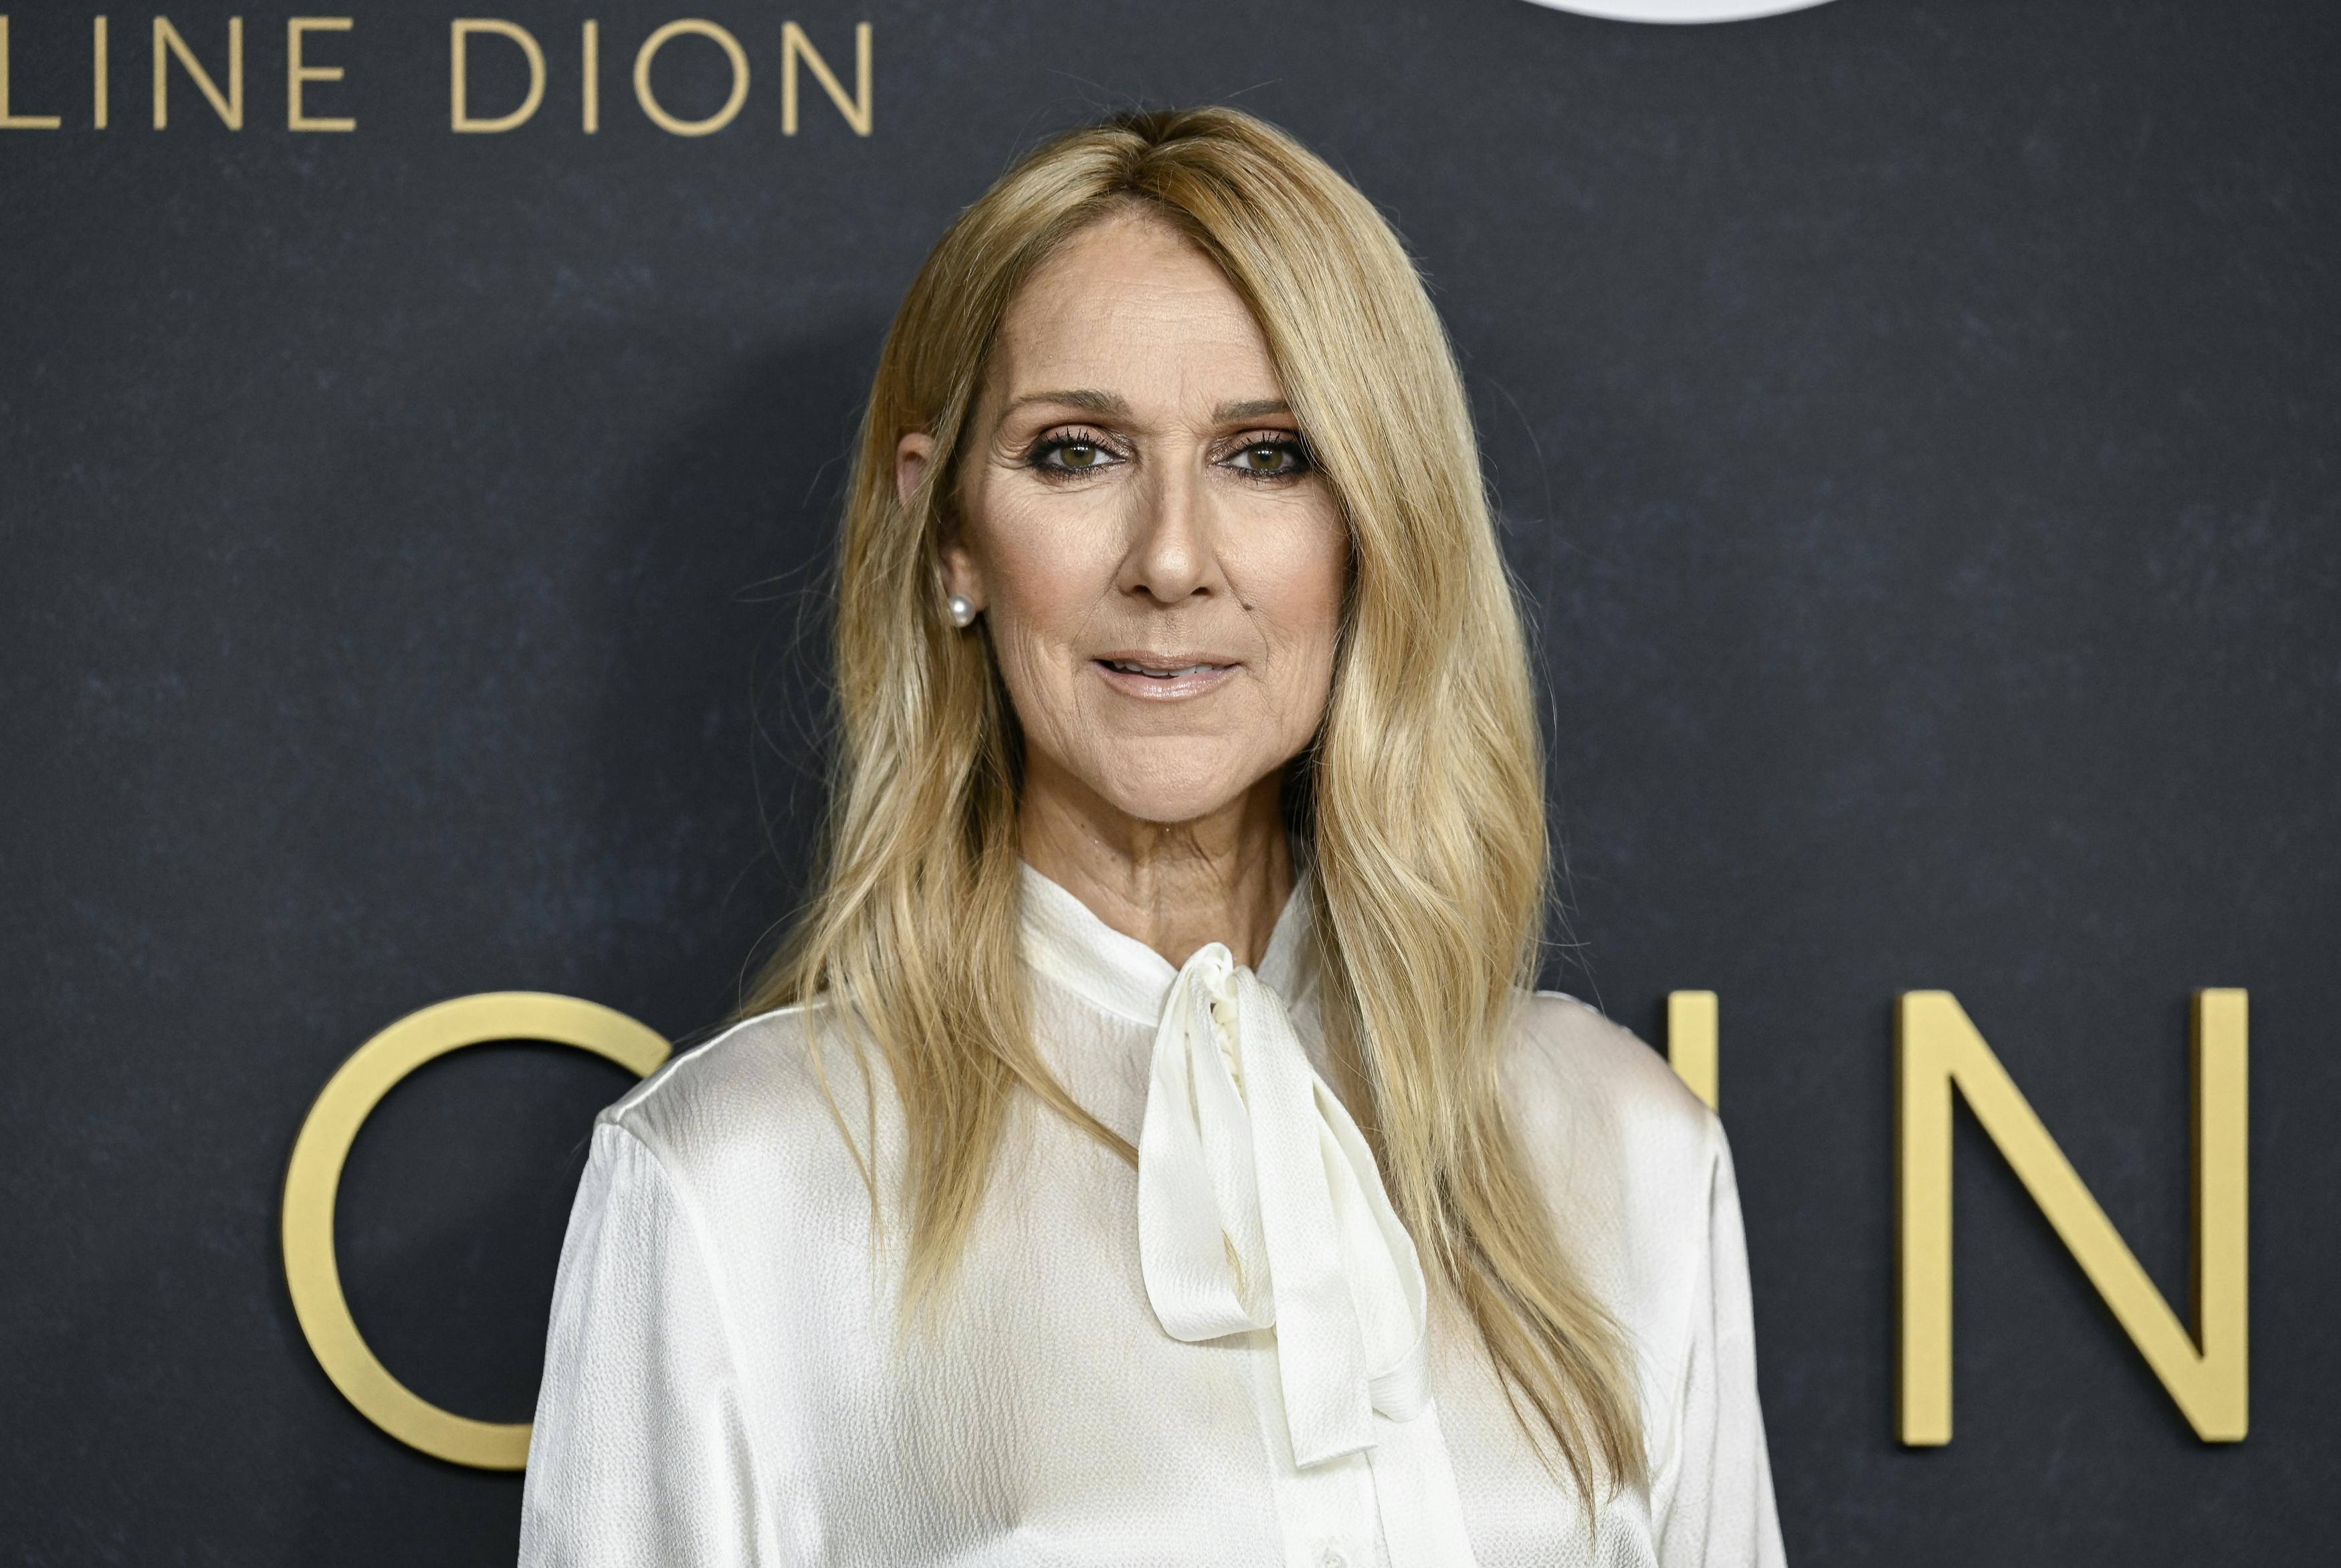 Celine Dion attends the Amazon MGM Studios special screening of "I Am: Celine Dion" at Alice Tully Hall on Monday, June 17, 2024, in New York. (Photo by Evan Agostini/Invision/AP)